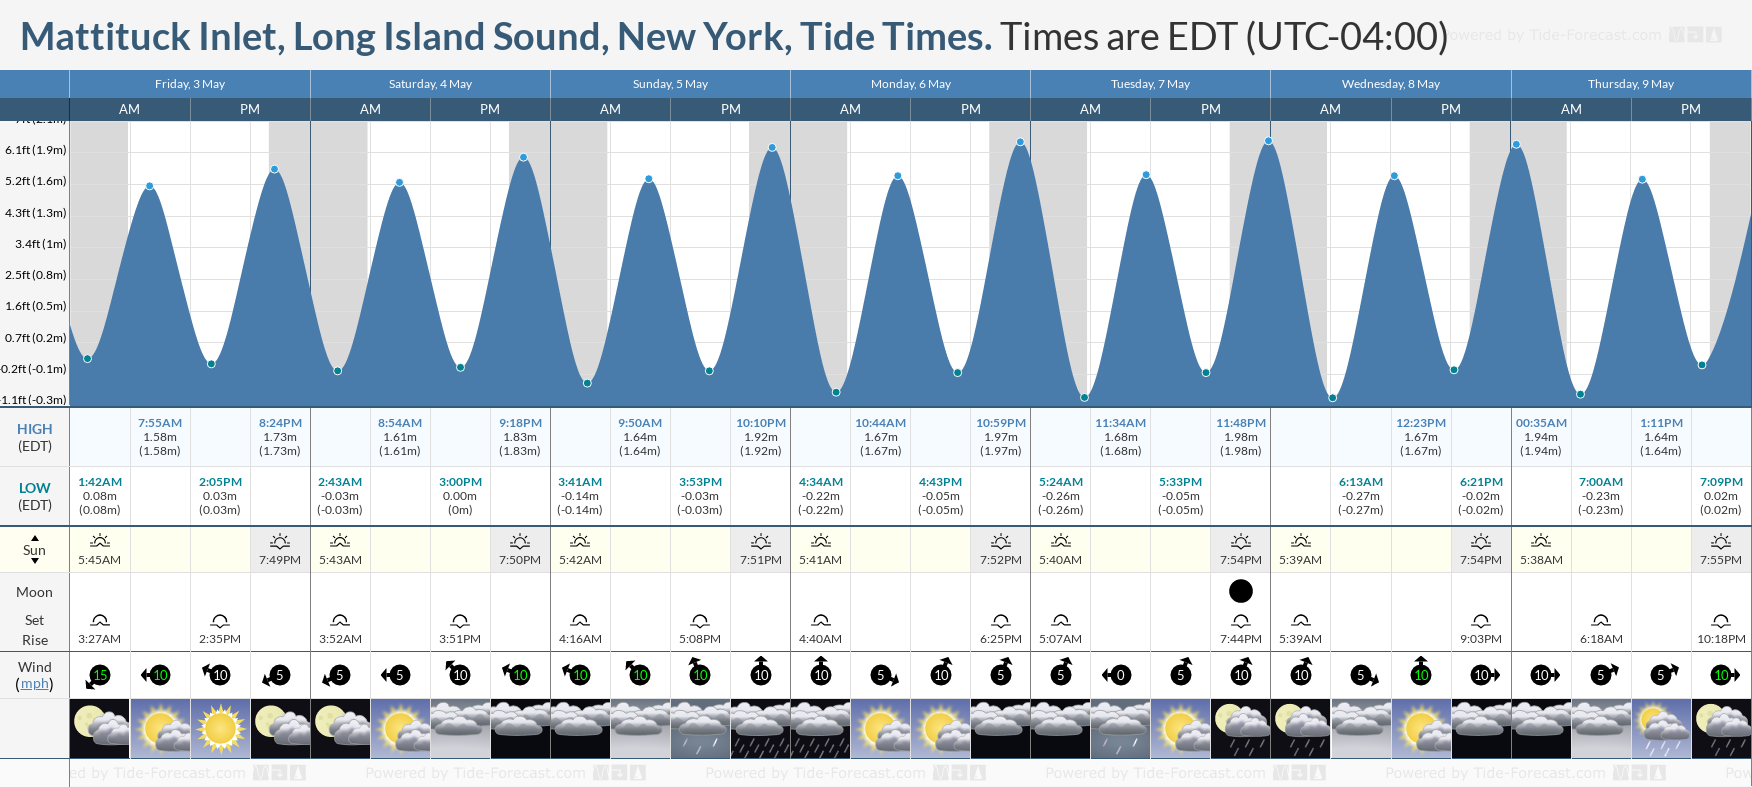 Mattituck Inlet, Long Island Sound, New York Tide Chart including high and low tide tide times for the next 7 days